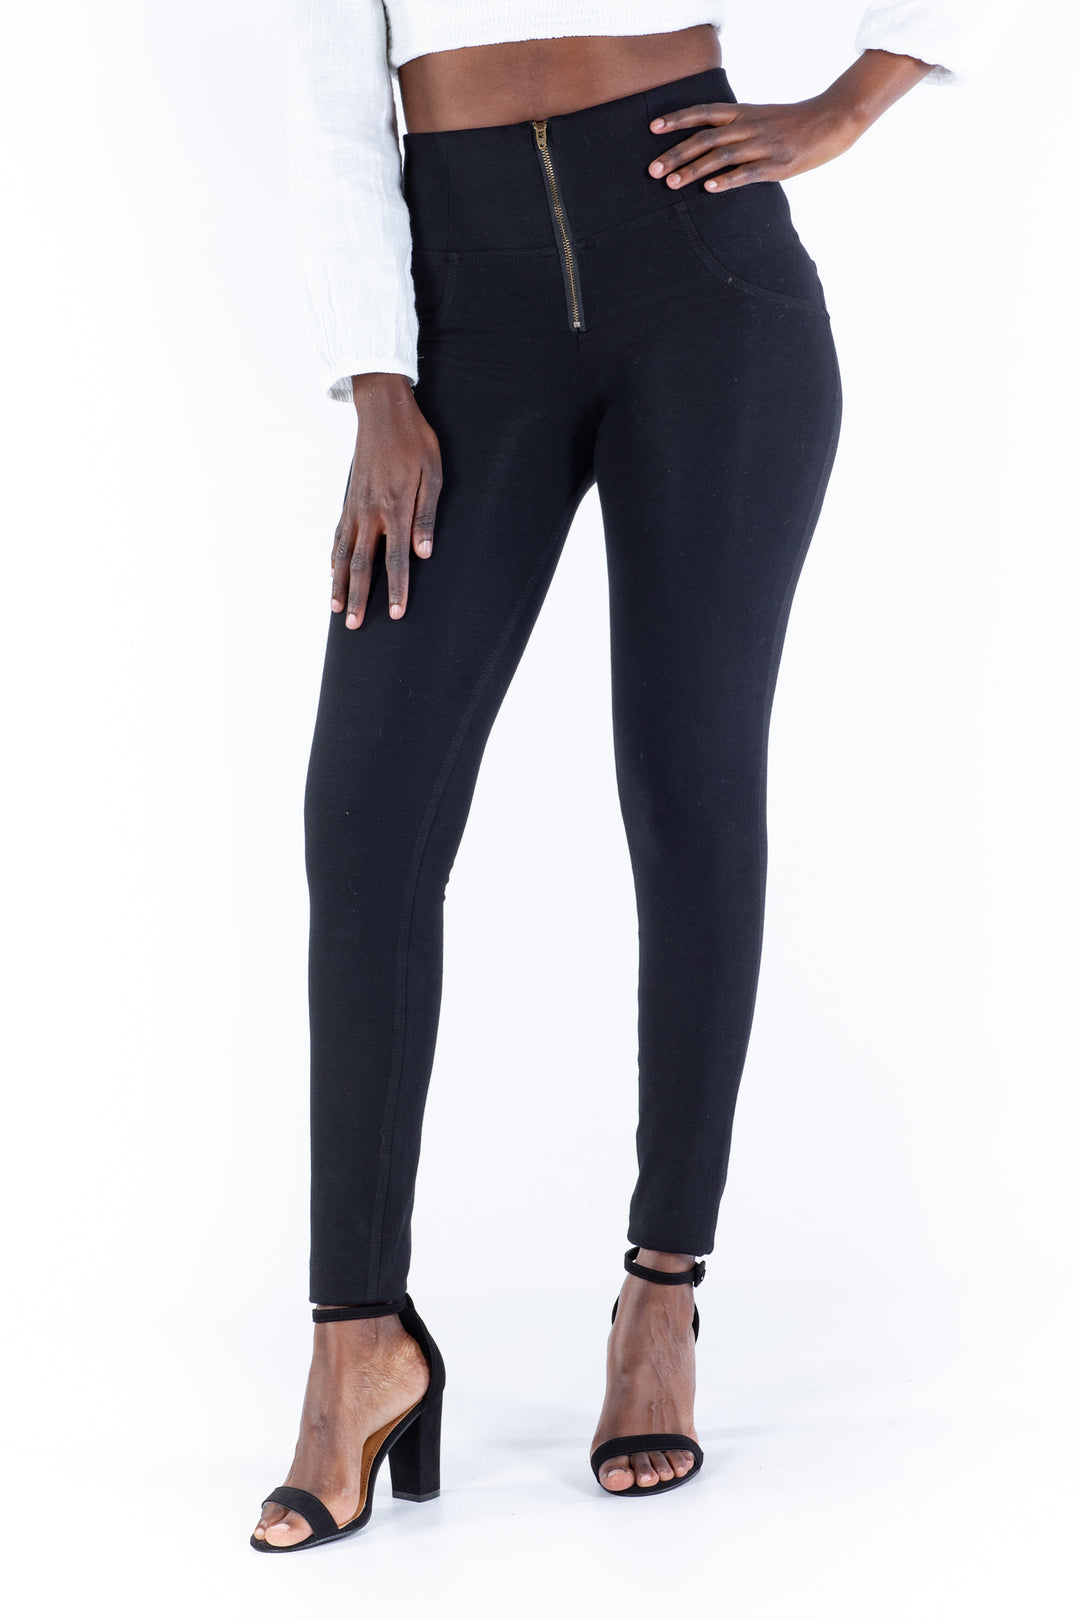 Compression Leggings with cell pocket - black